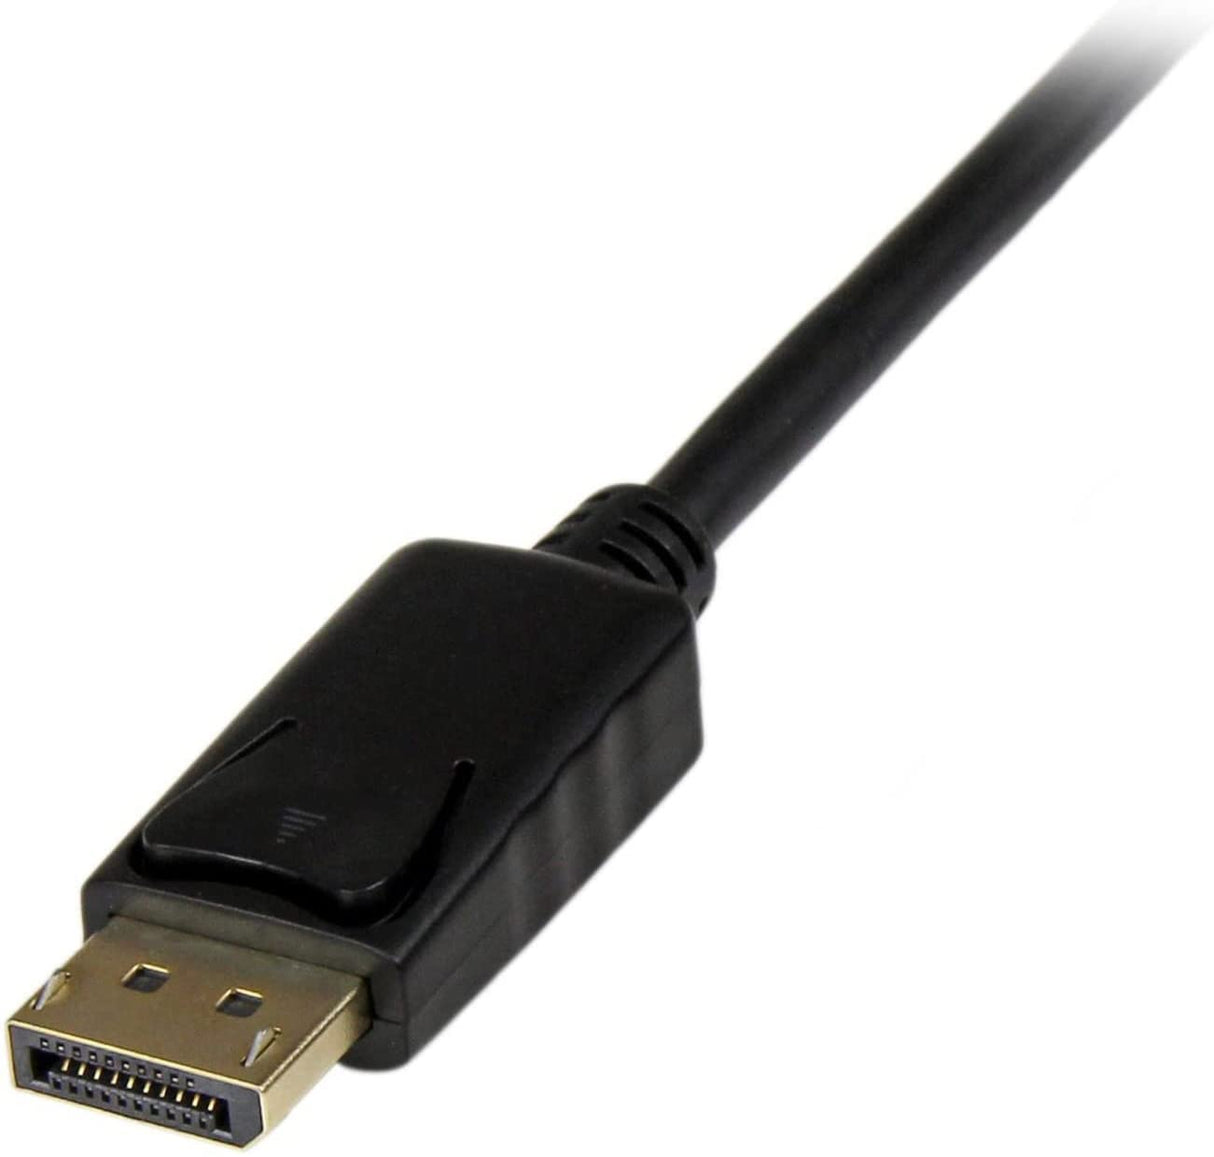 StarTech.com 3ft (1m) DisplayPort to DVI Cable - 1080p Video - Active DisplayPort to DVI Adapter Cable - DisplayPort to DVI-D Cable Converter Single Link - DP 1.2 to DVI Monitor Cable (DP2DVIMM3BS) 3 ft / 1 m